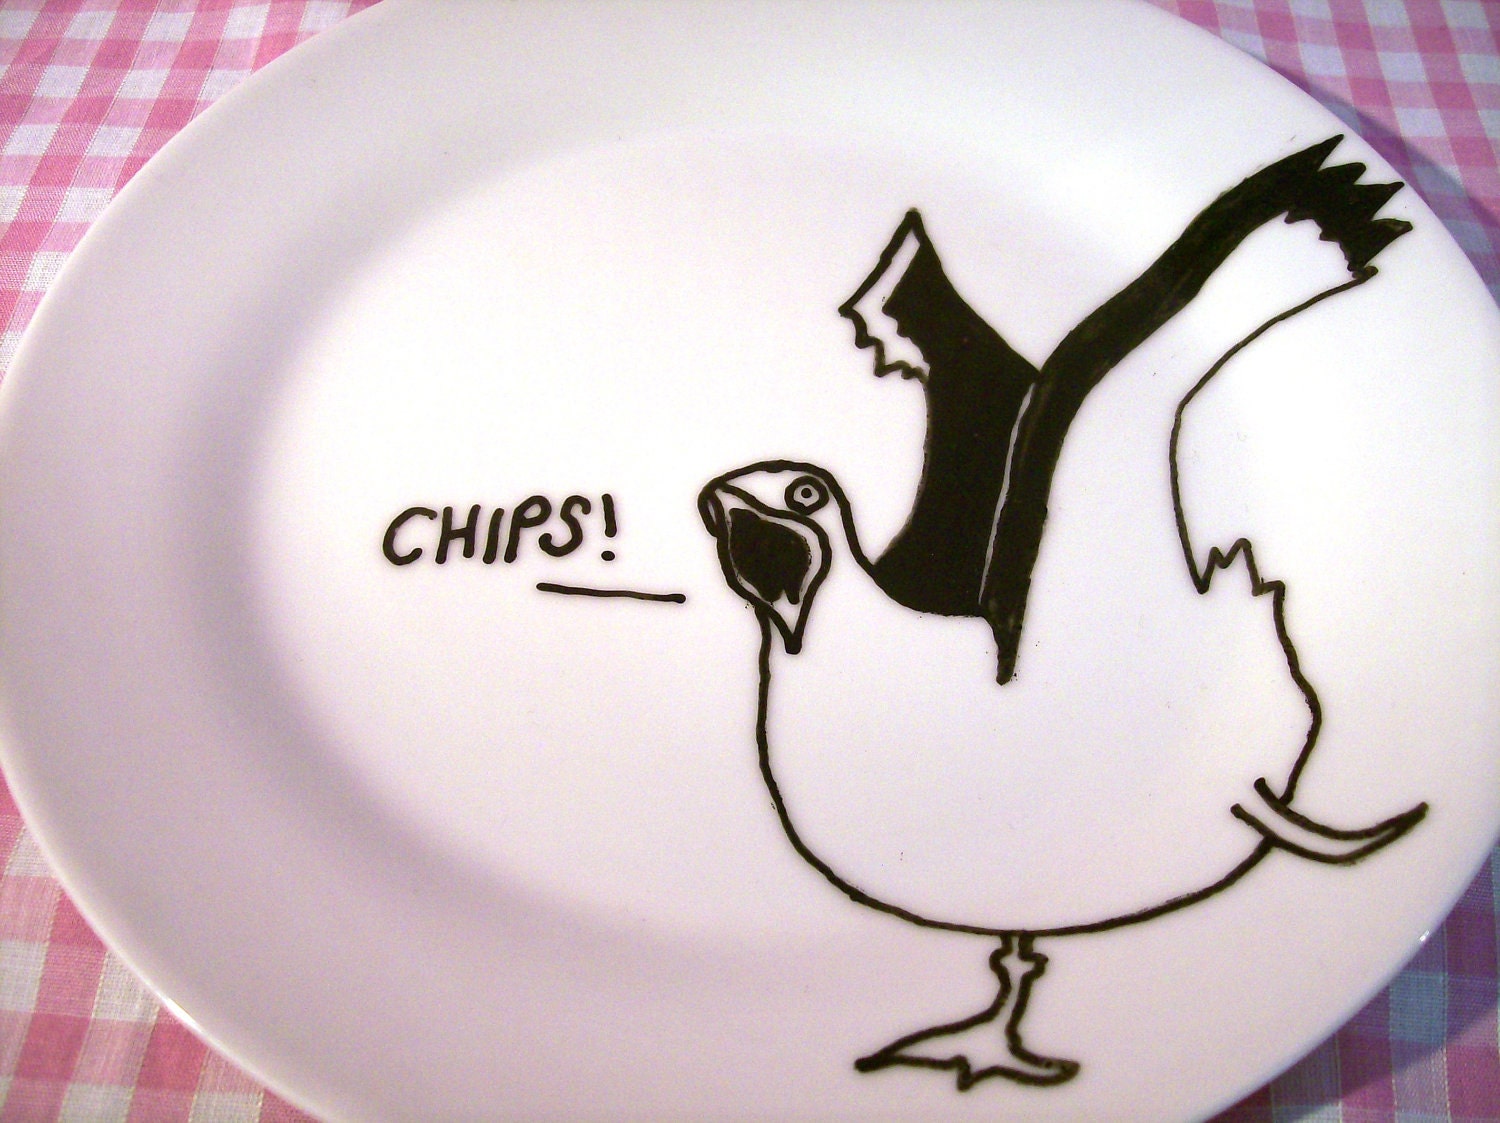 Decorative Seagull Plate in porcelain featuring a hand drawn illustration